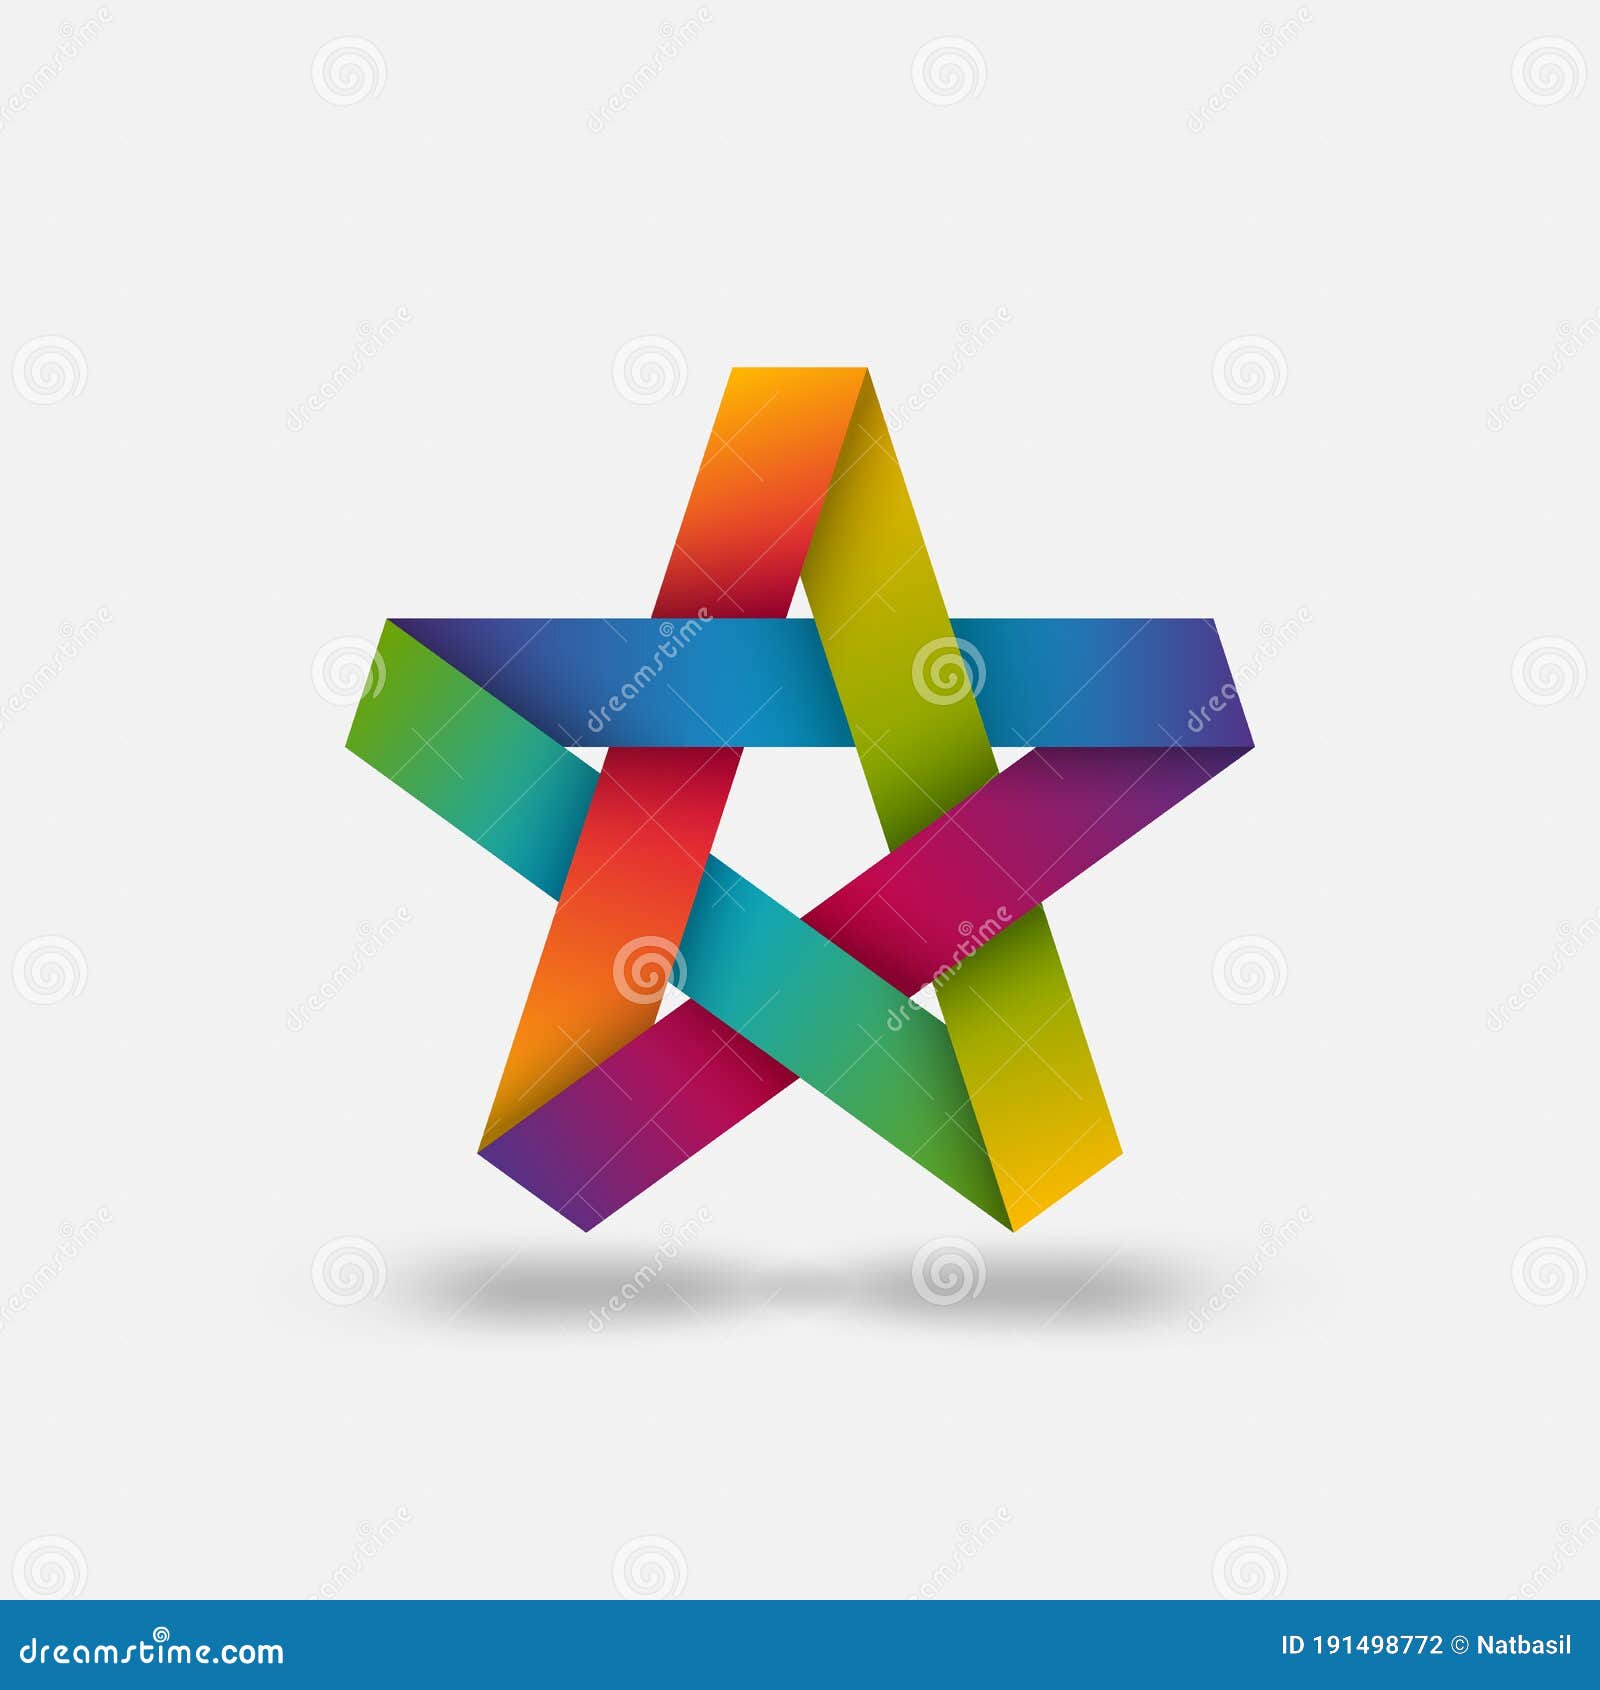 five-pointed star in rainbow colors